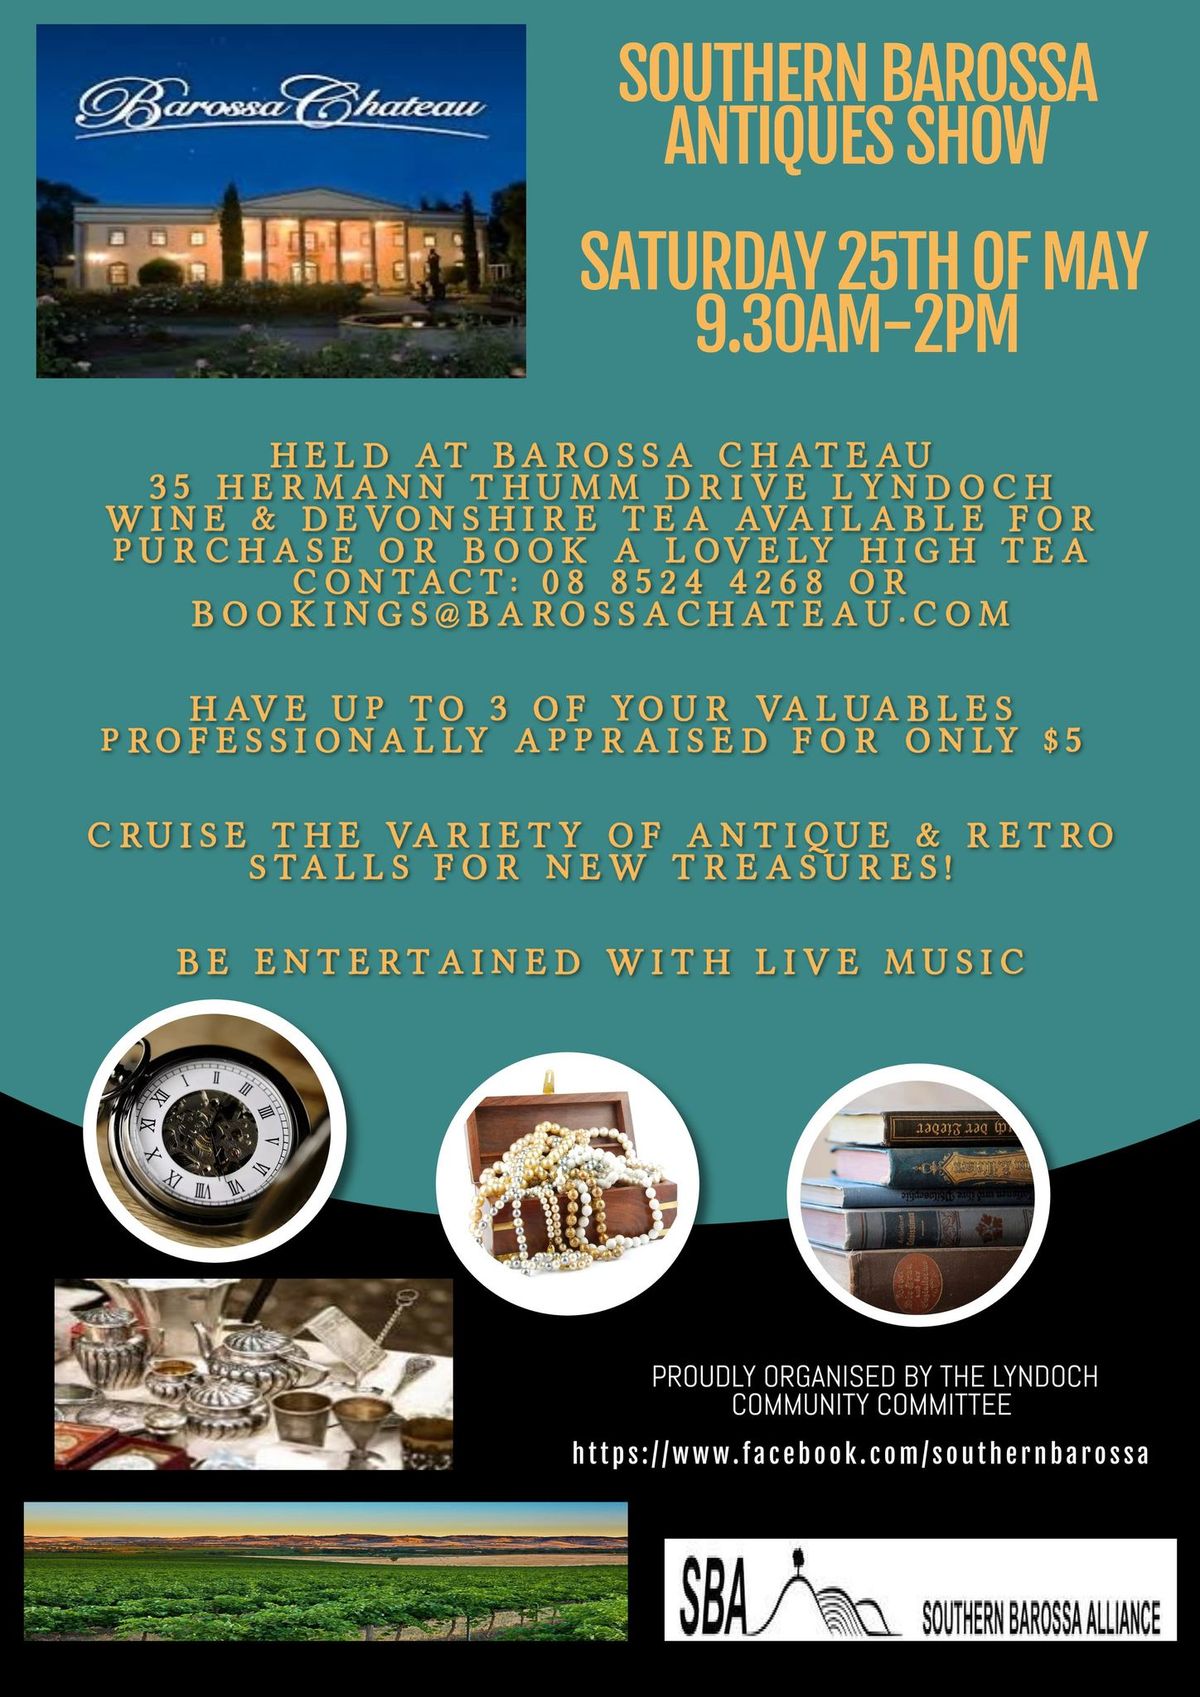 Southern Barossa Antiques Show